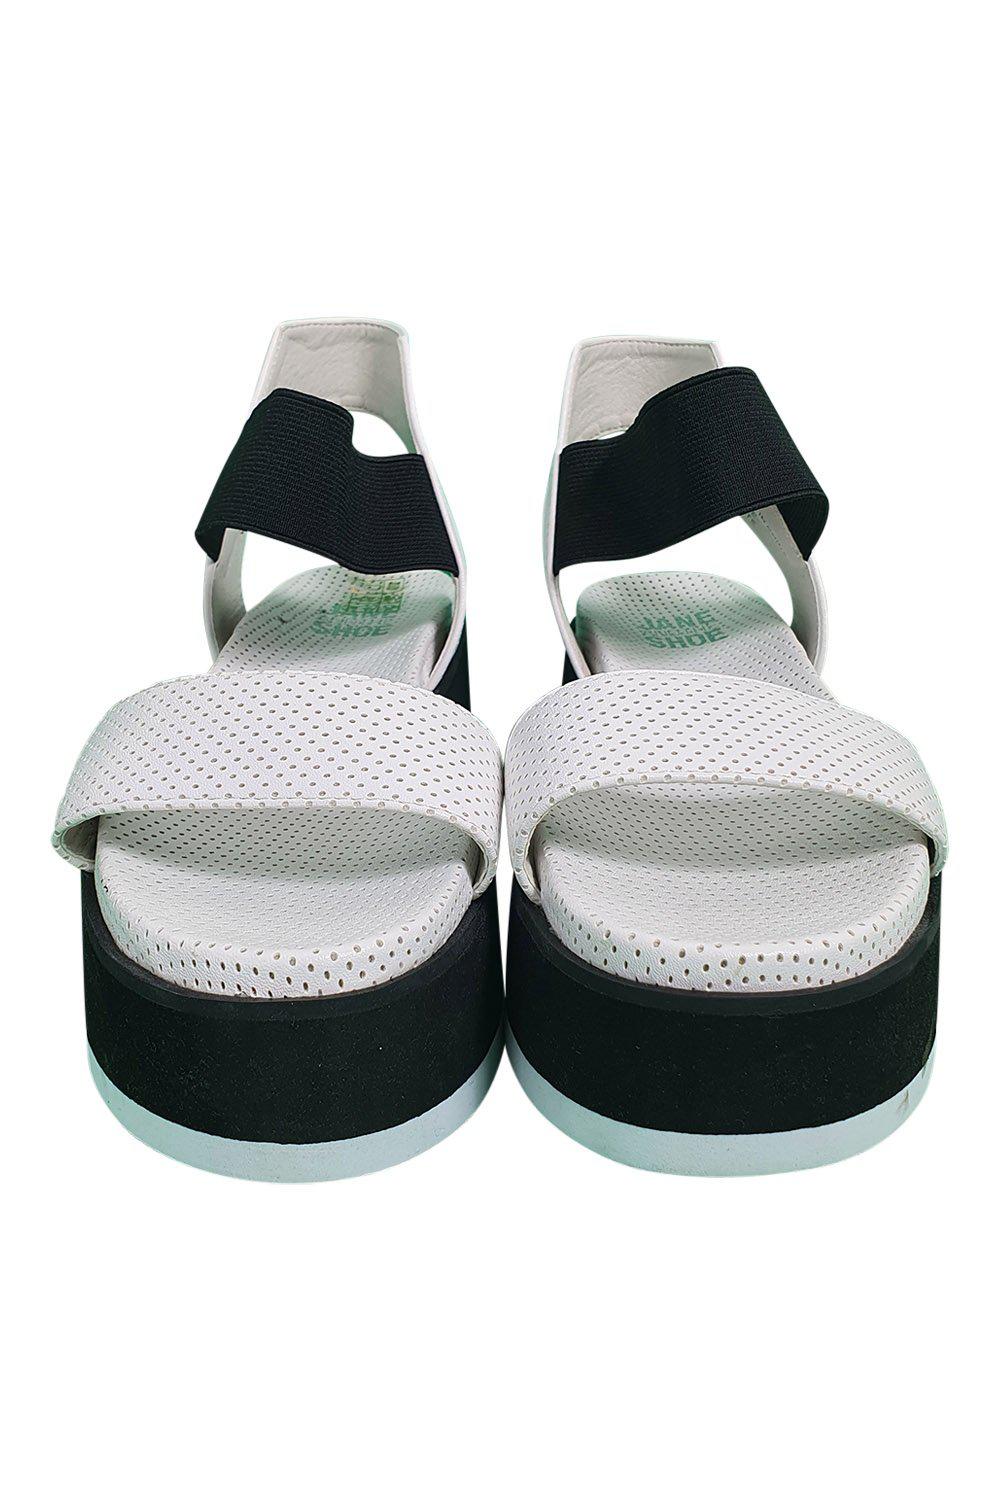 JANE AND THE SHOE White Black Perforated Strappy Sandals (US 6 | UK 3 | EU 36)-Jane and The Shoe-The Freperie